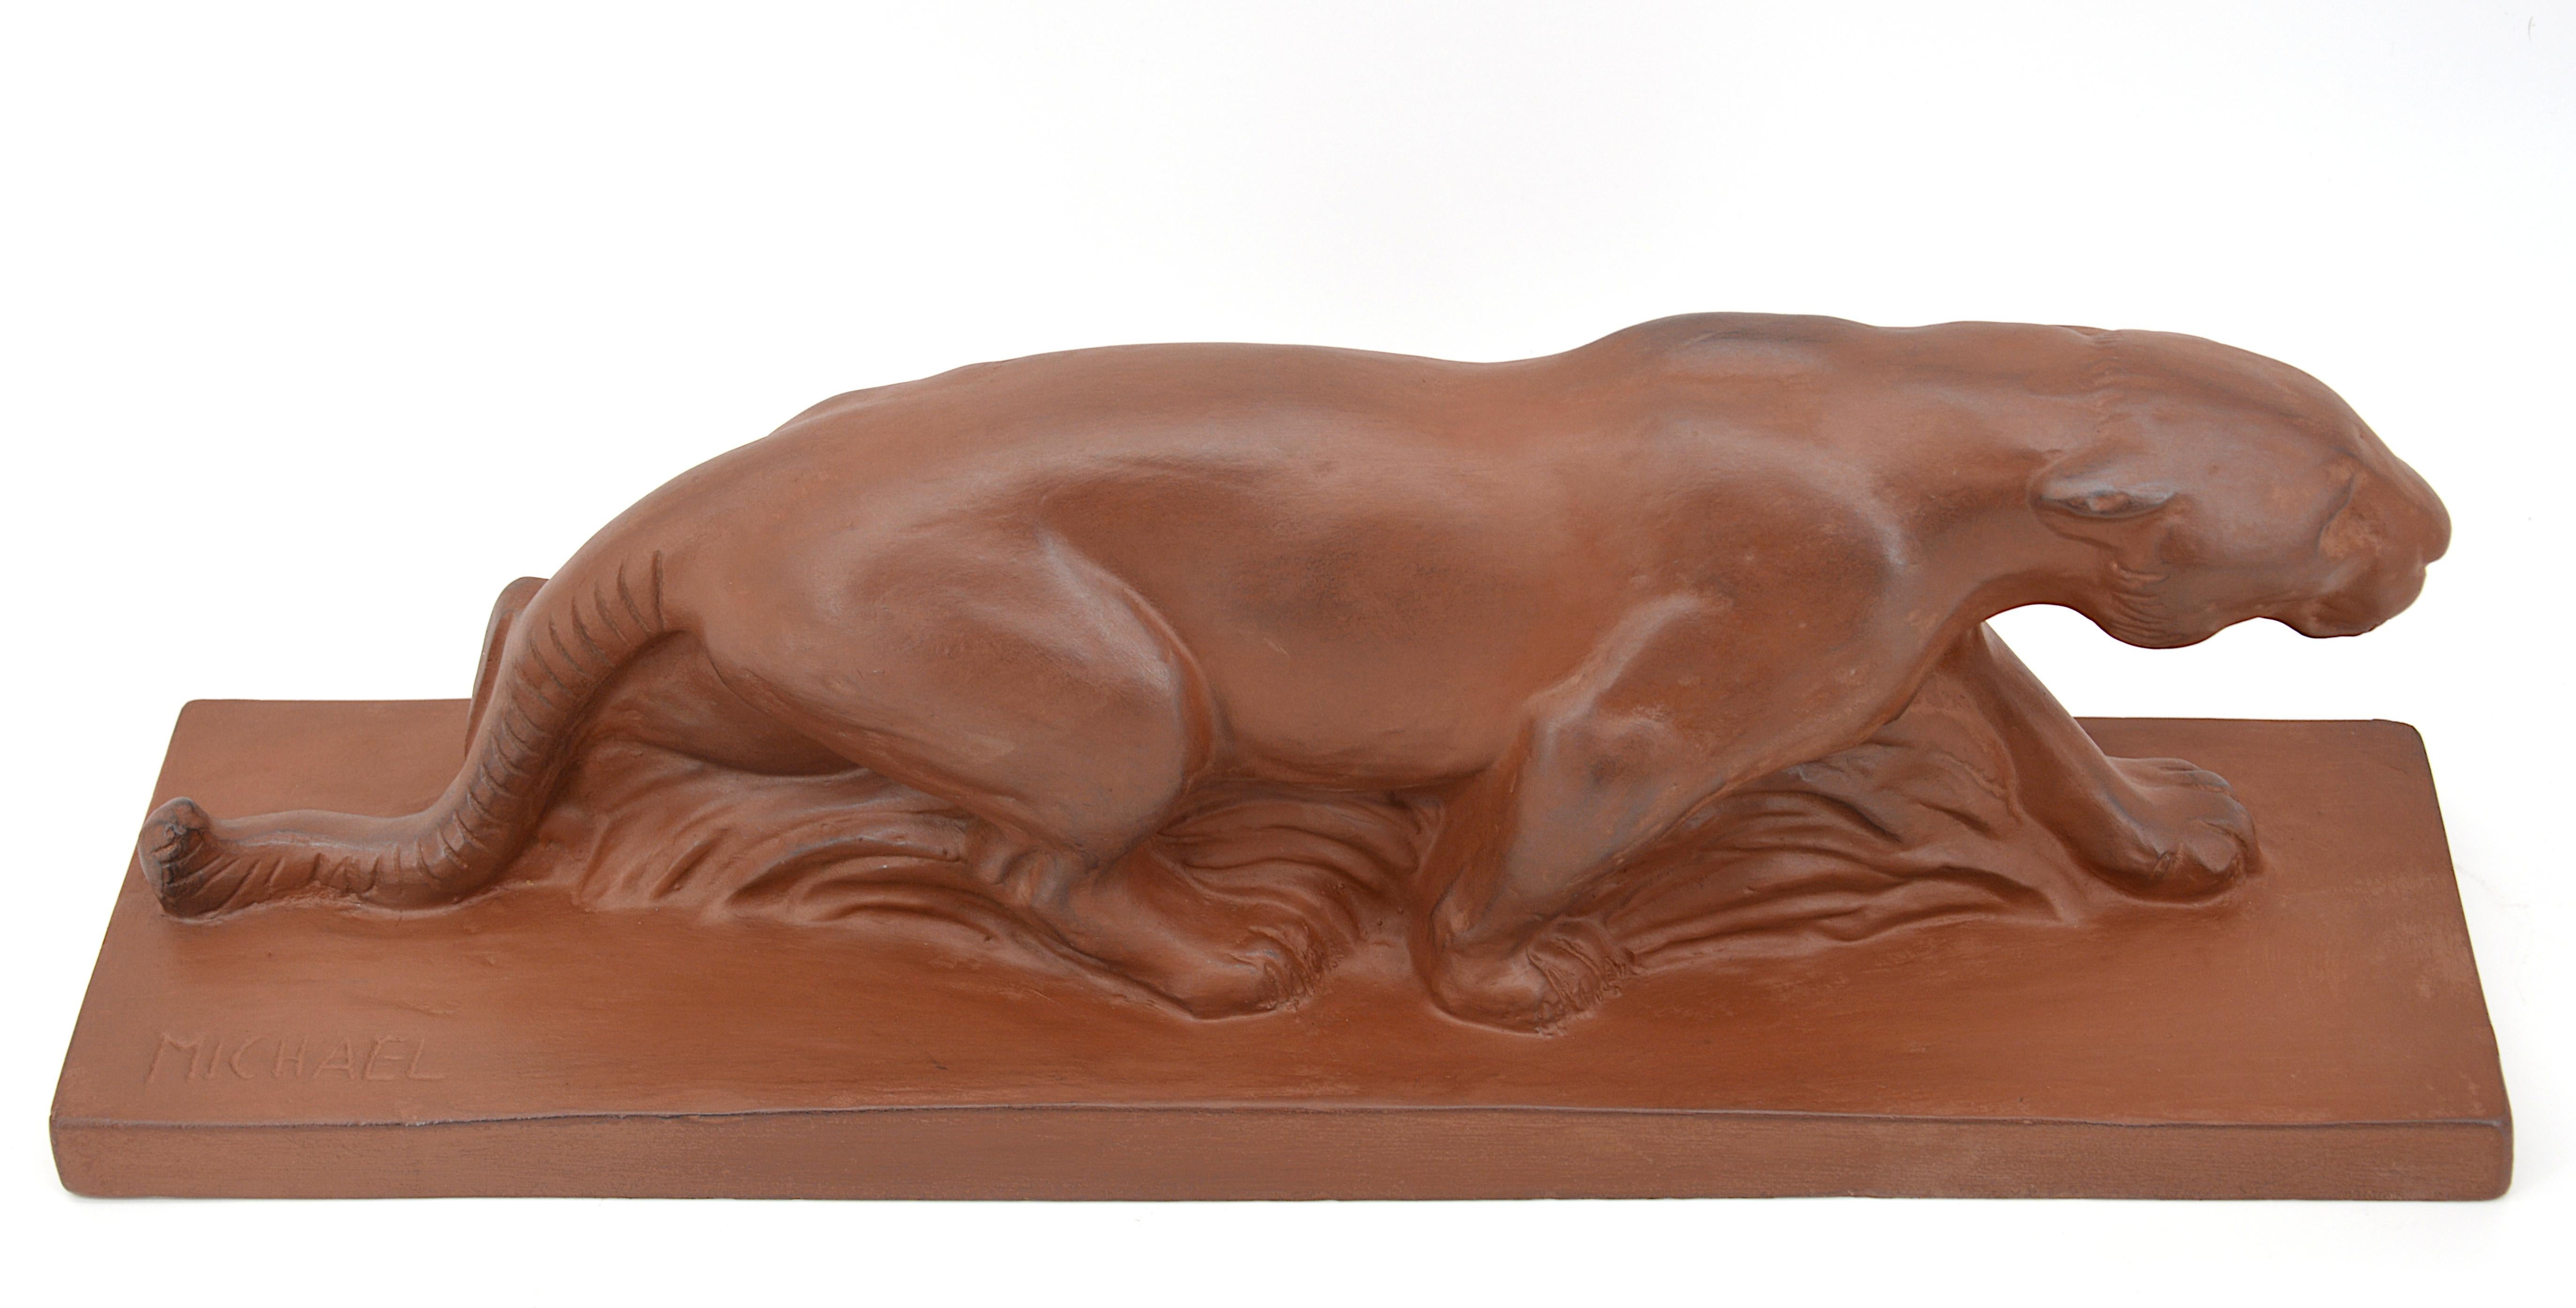 French Art Deco terracotta sculpture by Michael, France, 1930s. Lioness. Measures: Width 20.5